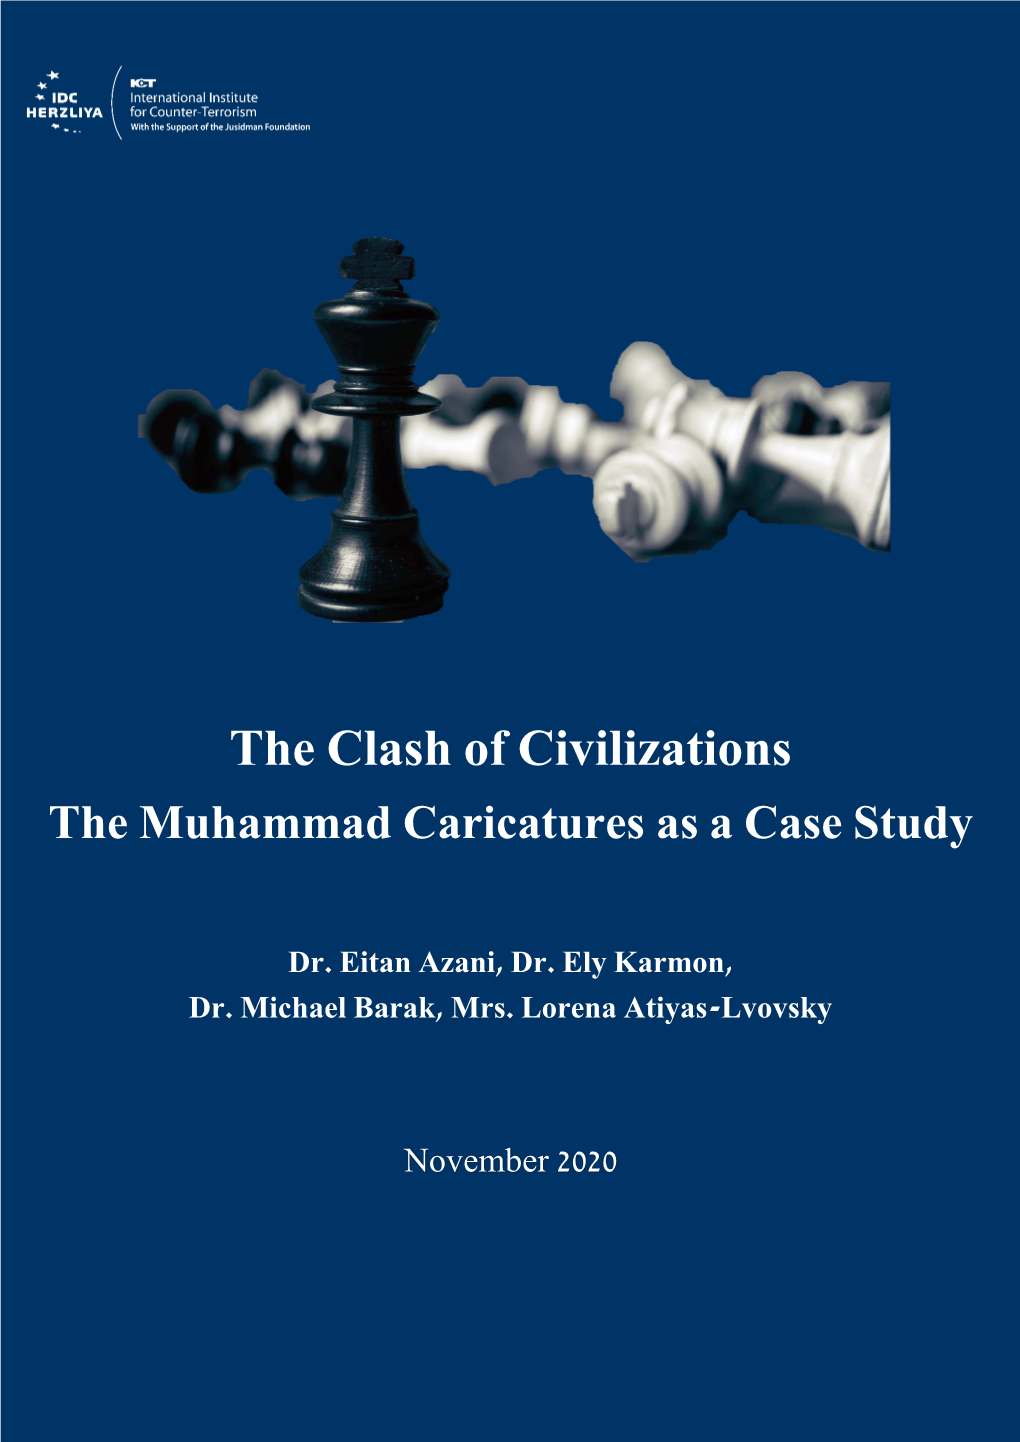 The Clash of Civilizations the Muhammad Caricatures As a Case Study